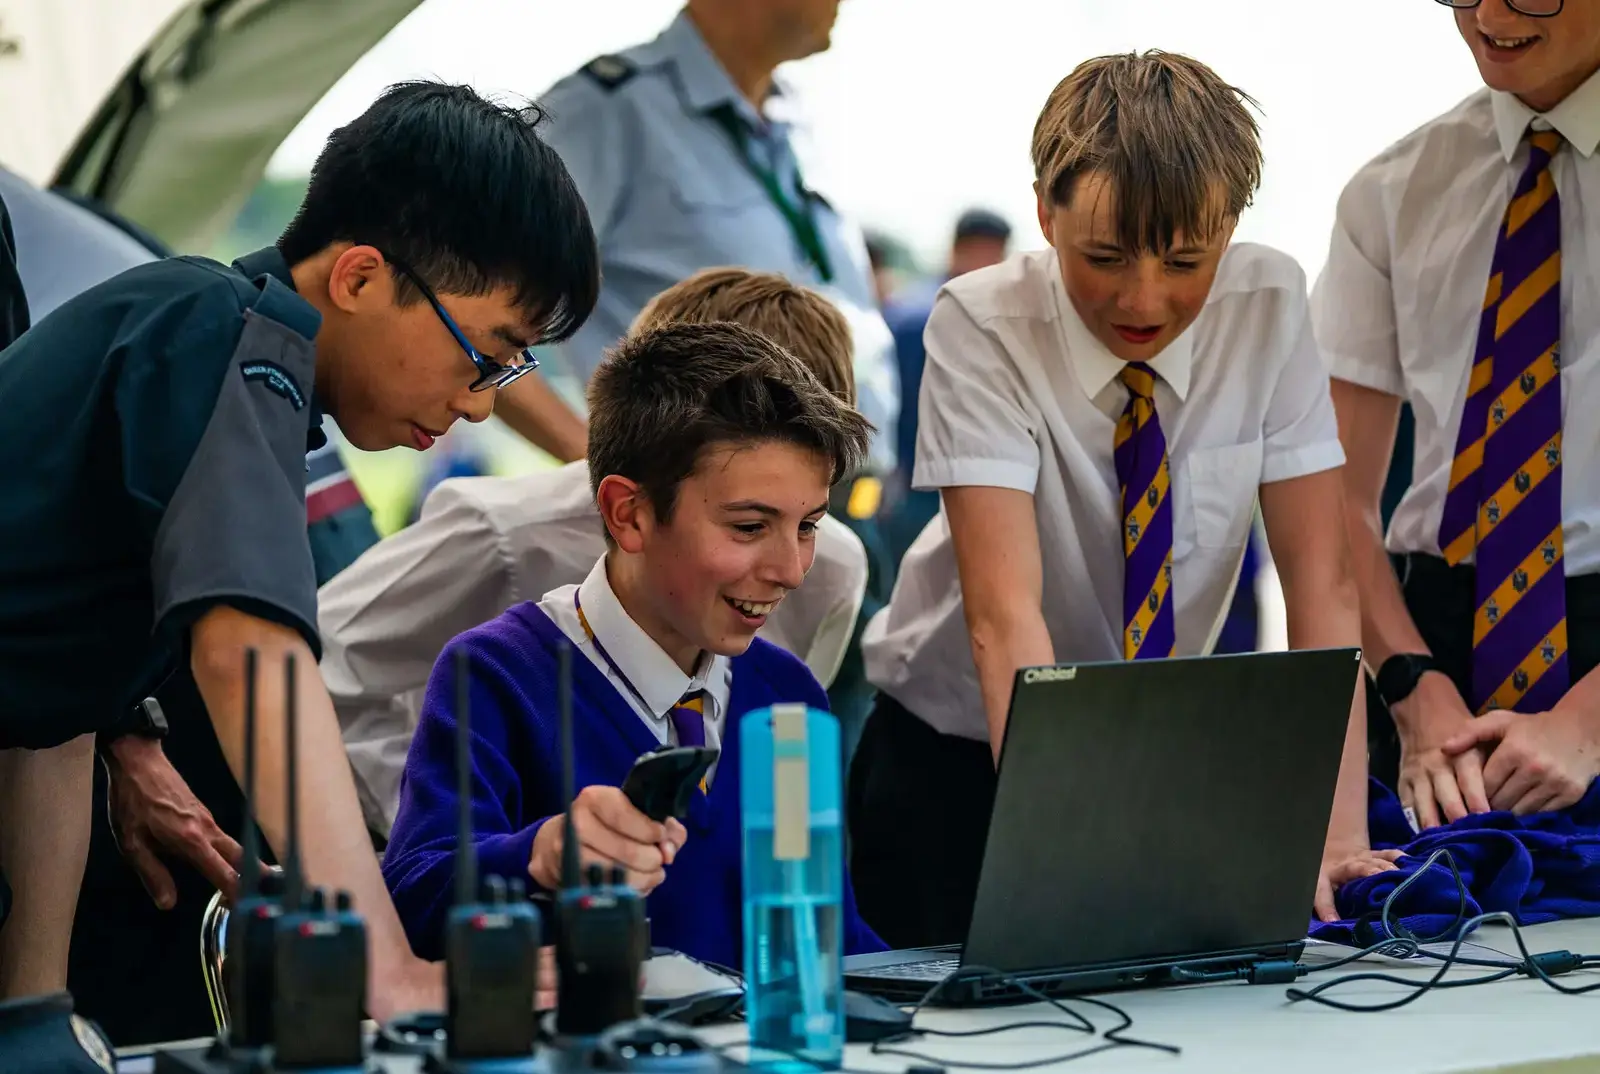 Senior School pupils playing a video game